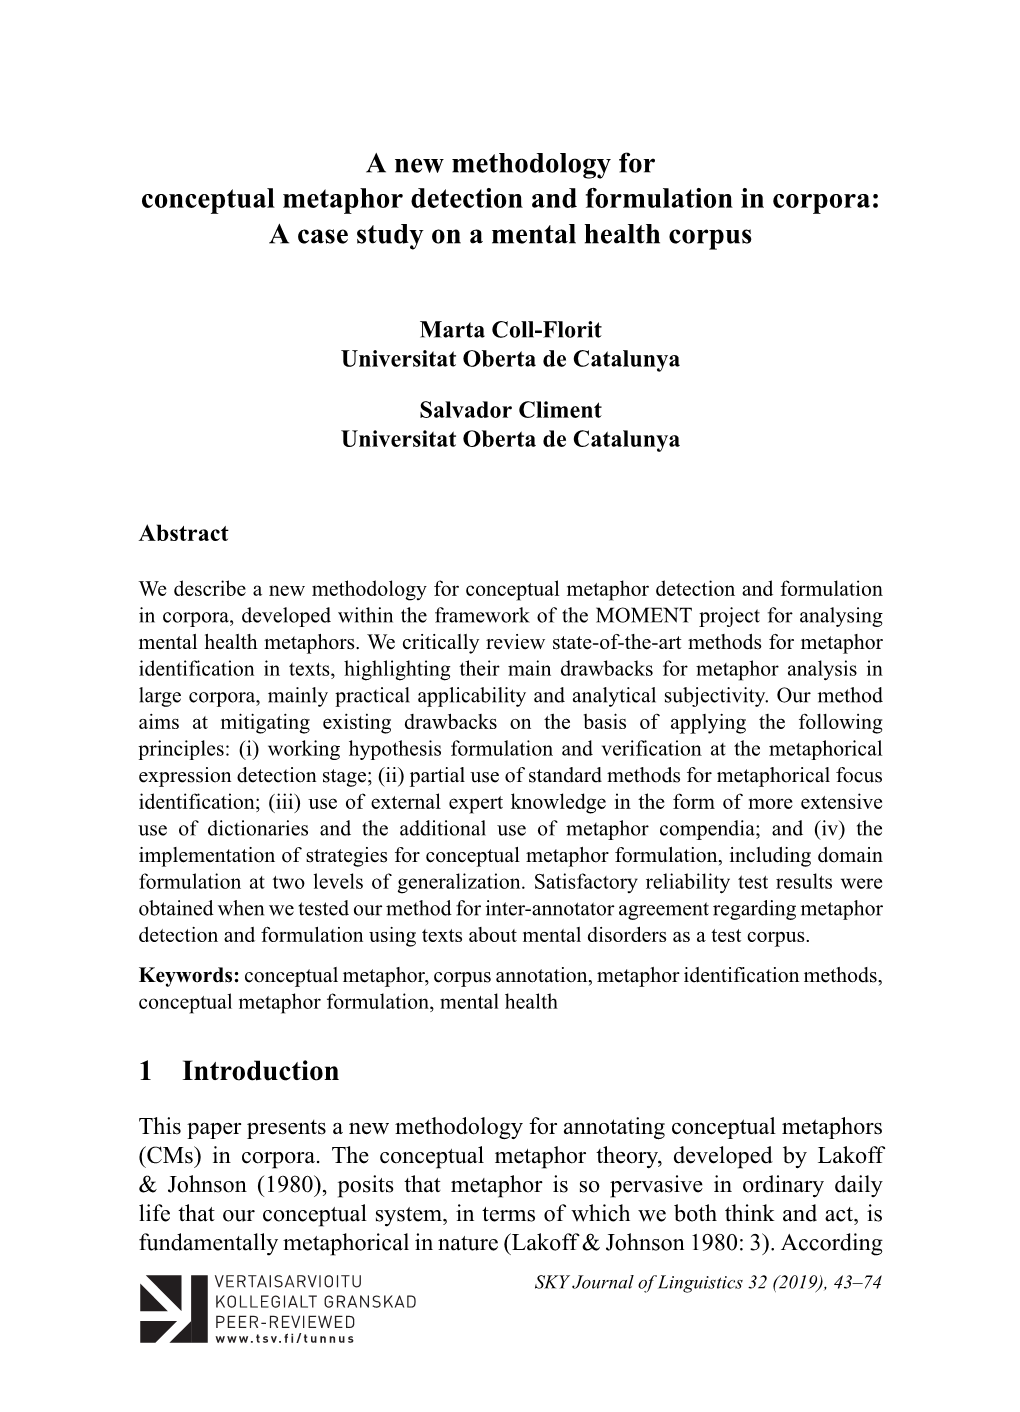 A New Methodology for Conceptual Metaphor Detection and Formulation in Corpora: a Case Study on a Mental Health Corpus